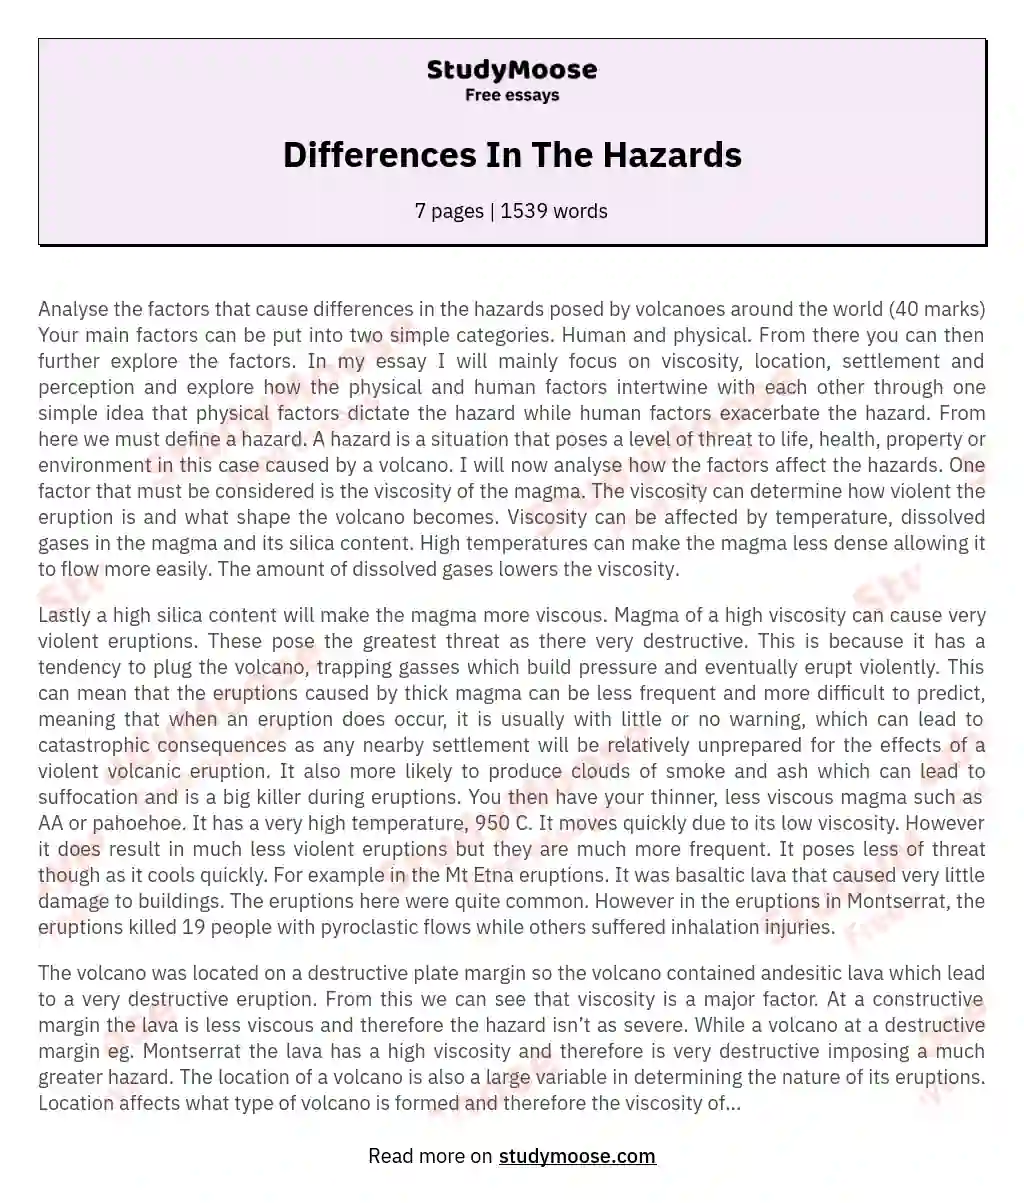 Differences In The Hazards essay